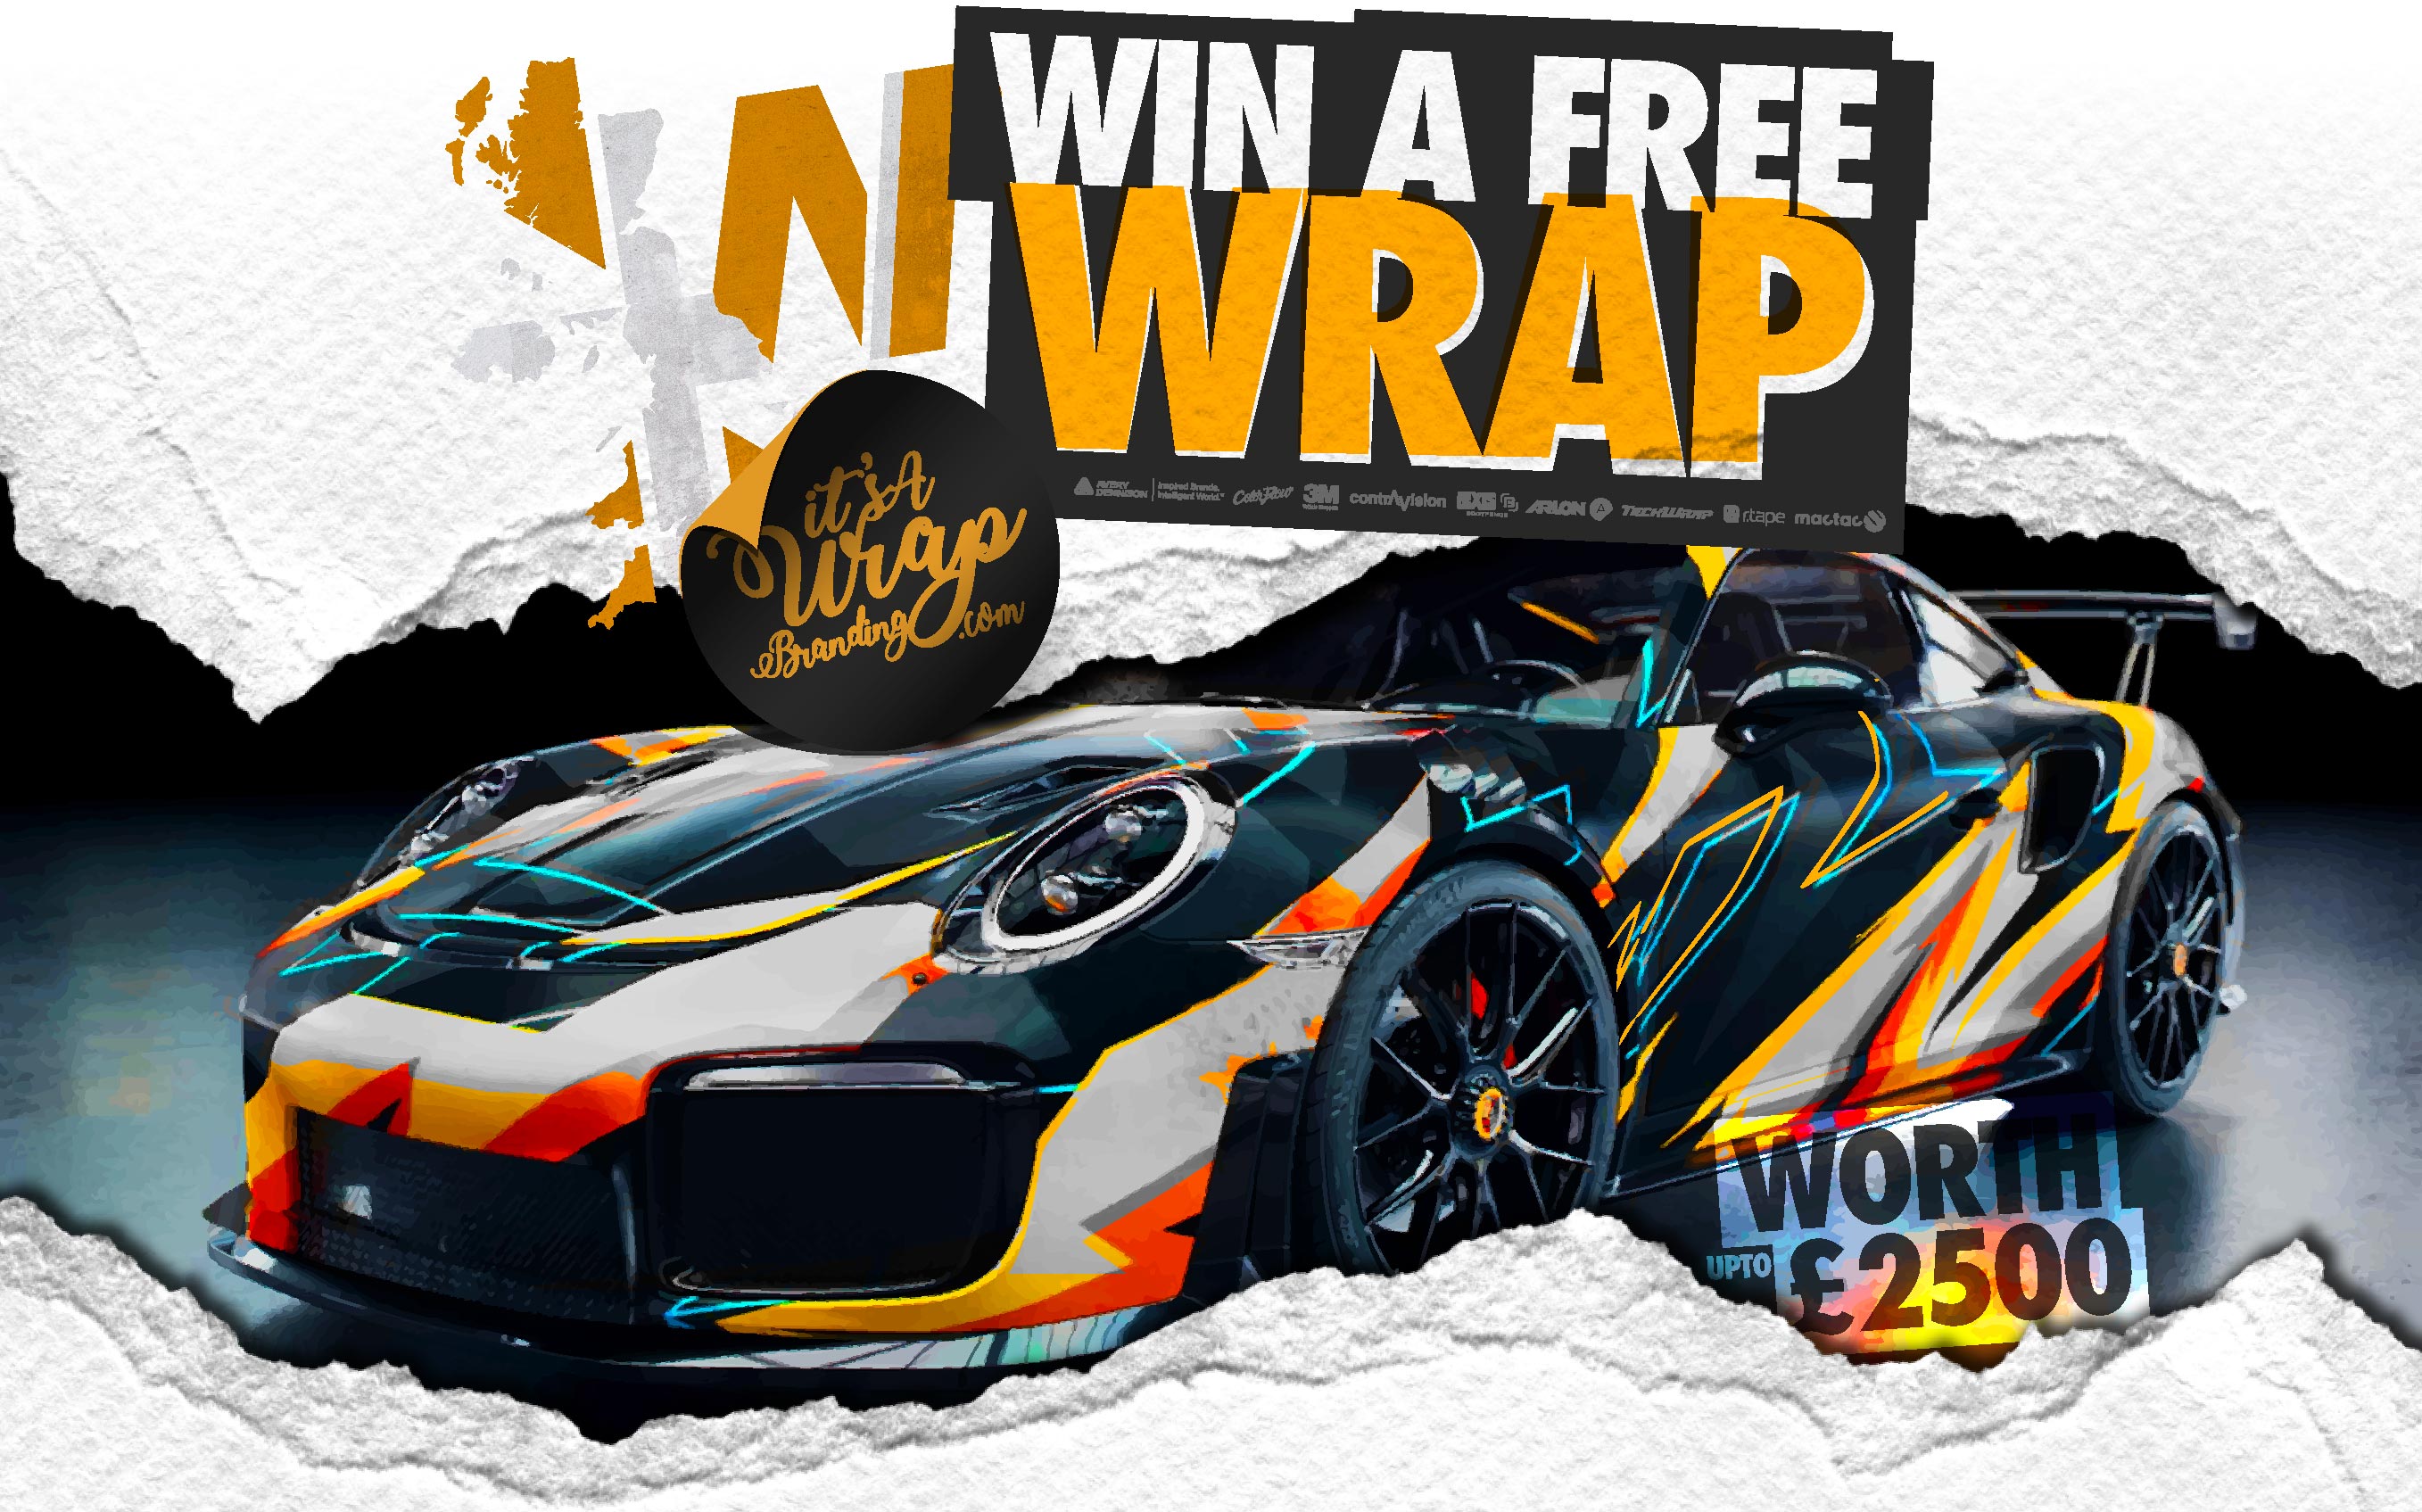 Win a Vehicle Wrap Prize Draw Giveaway